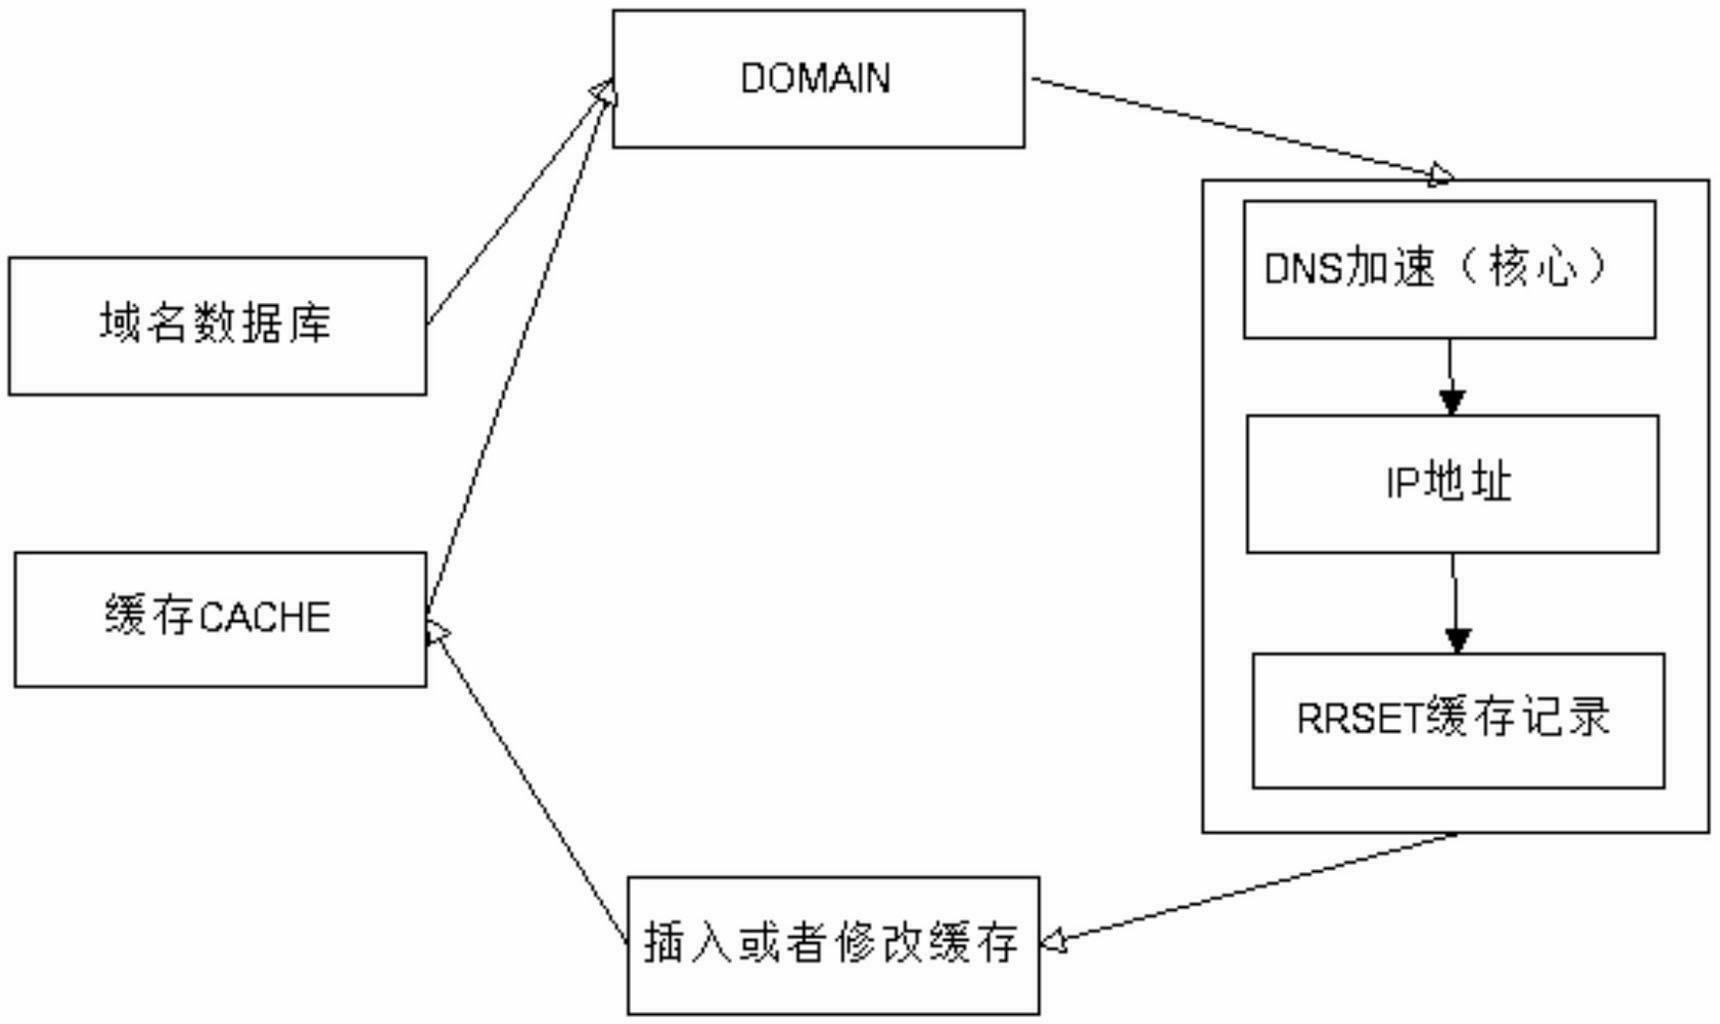 Domain name analysis method for building hyper text transport protocol (HTTP) connection for domain name and server